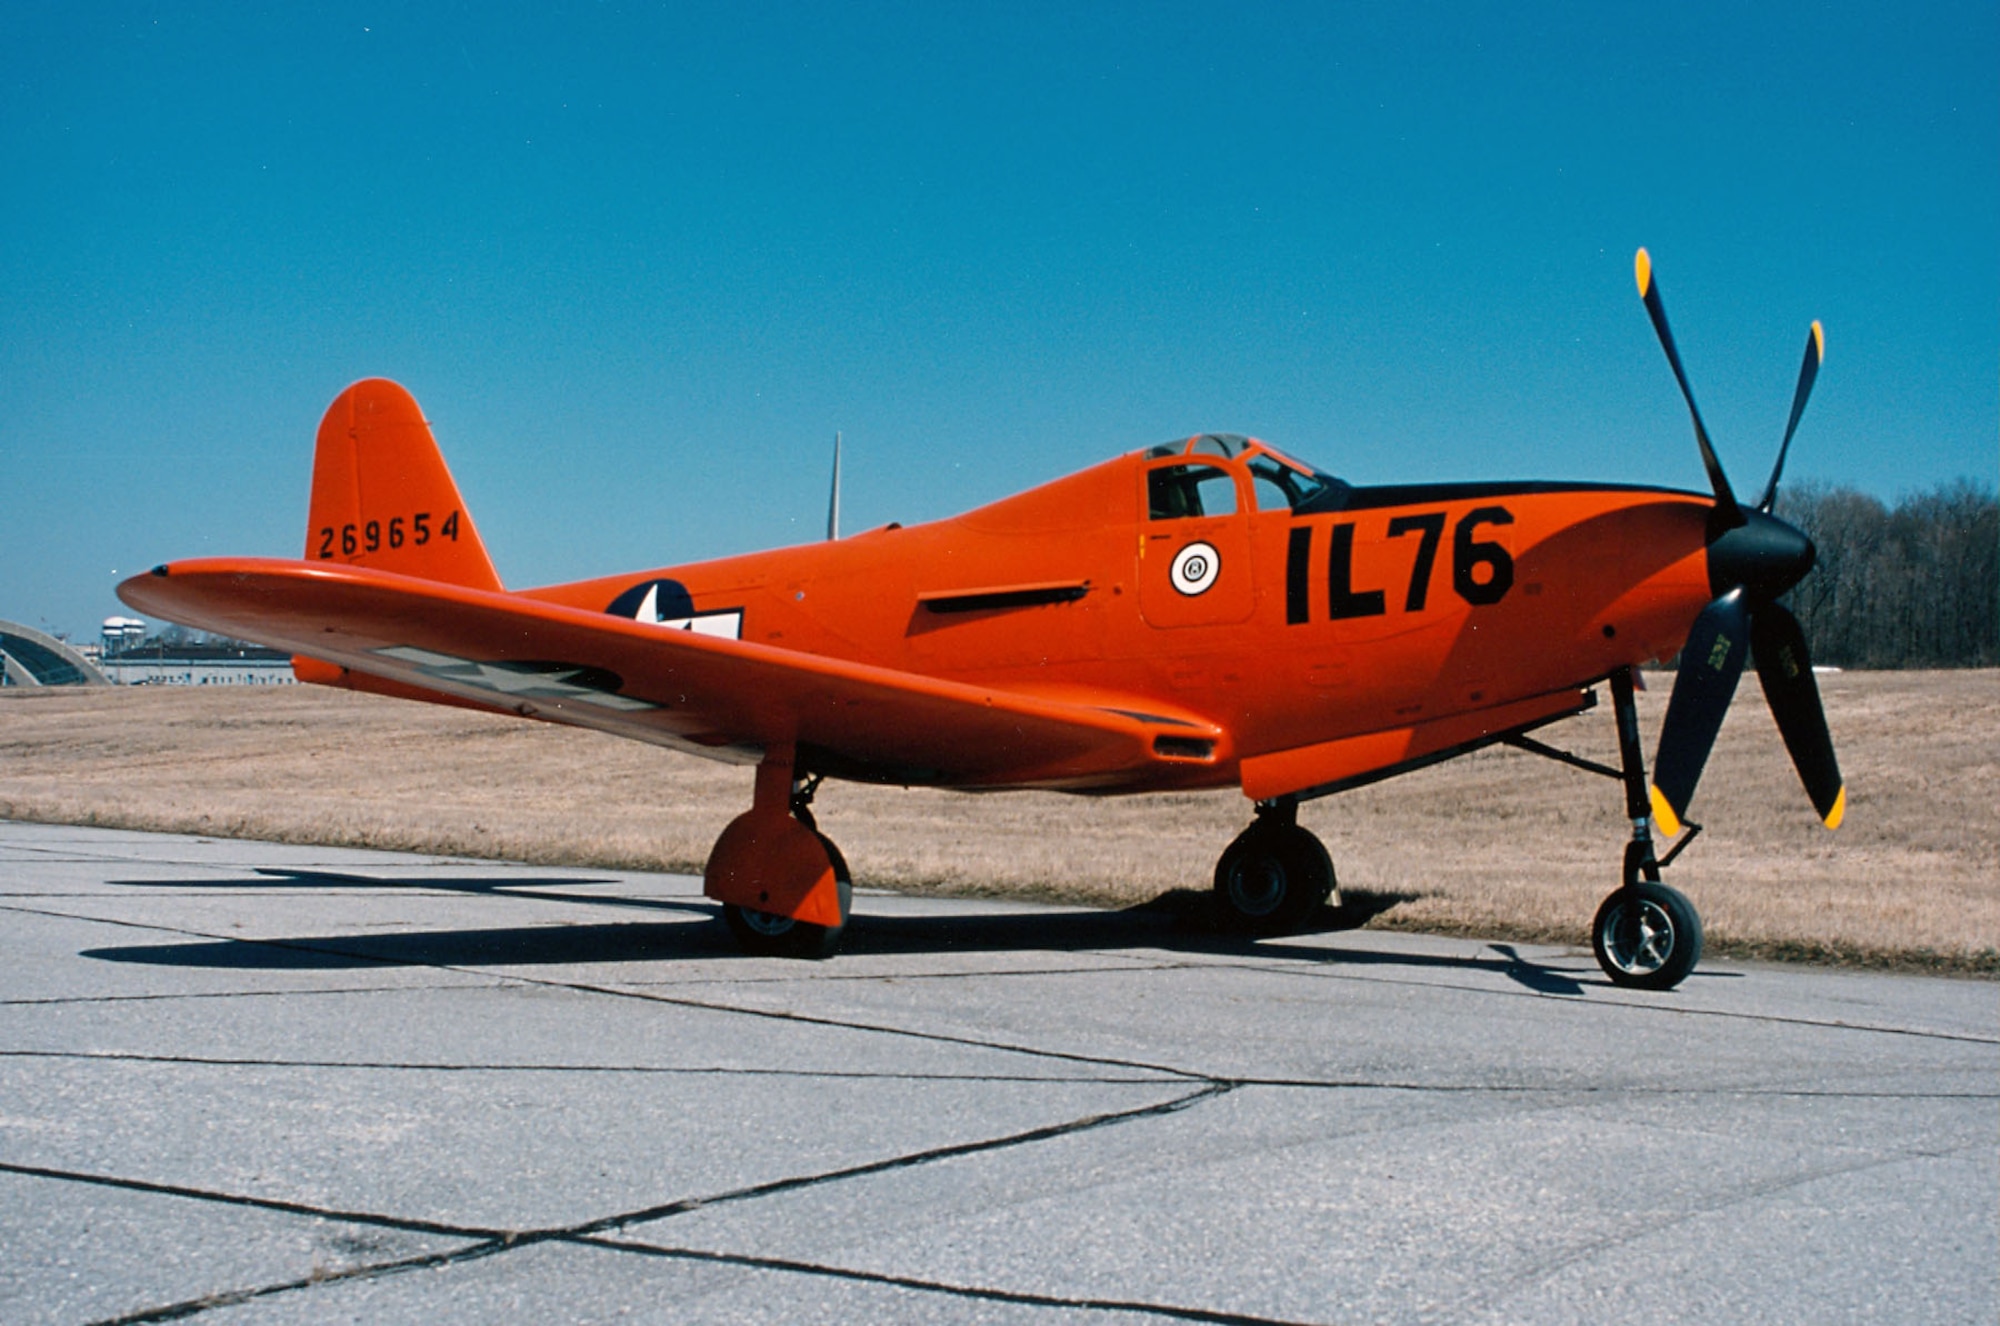 DAYTON, Ohio -- Bell P-63E Kingcobra at the National Museum of the United States Air Force. (U.S. Air Force photo)